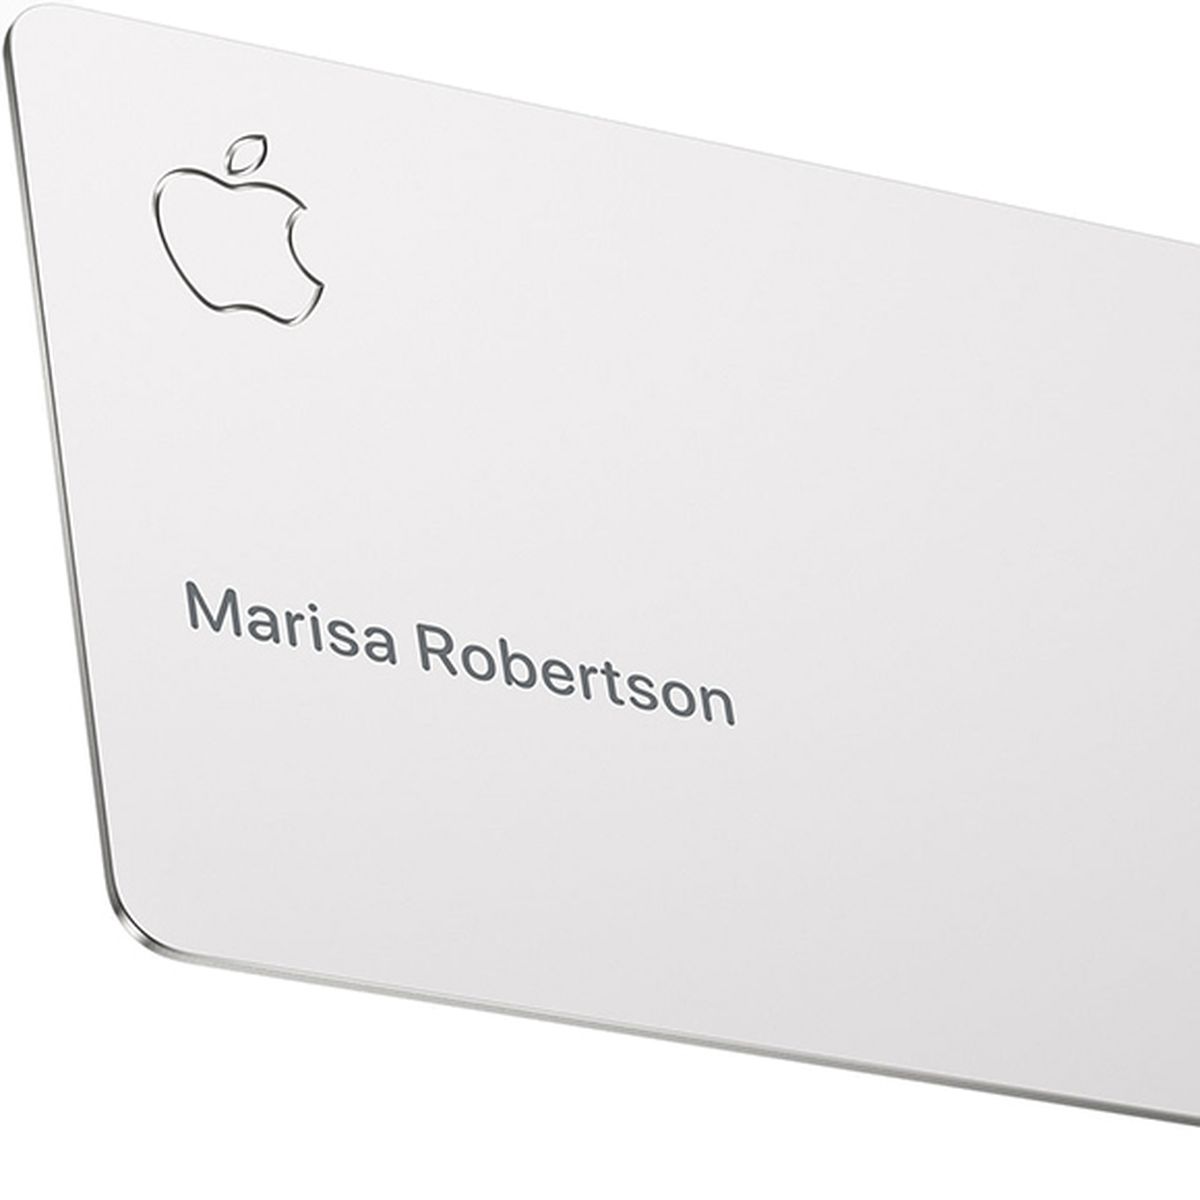 Concept: How Apple Card+ could rival other premium cards with exclusive  perks and rewards - 9to5Mac